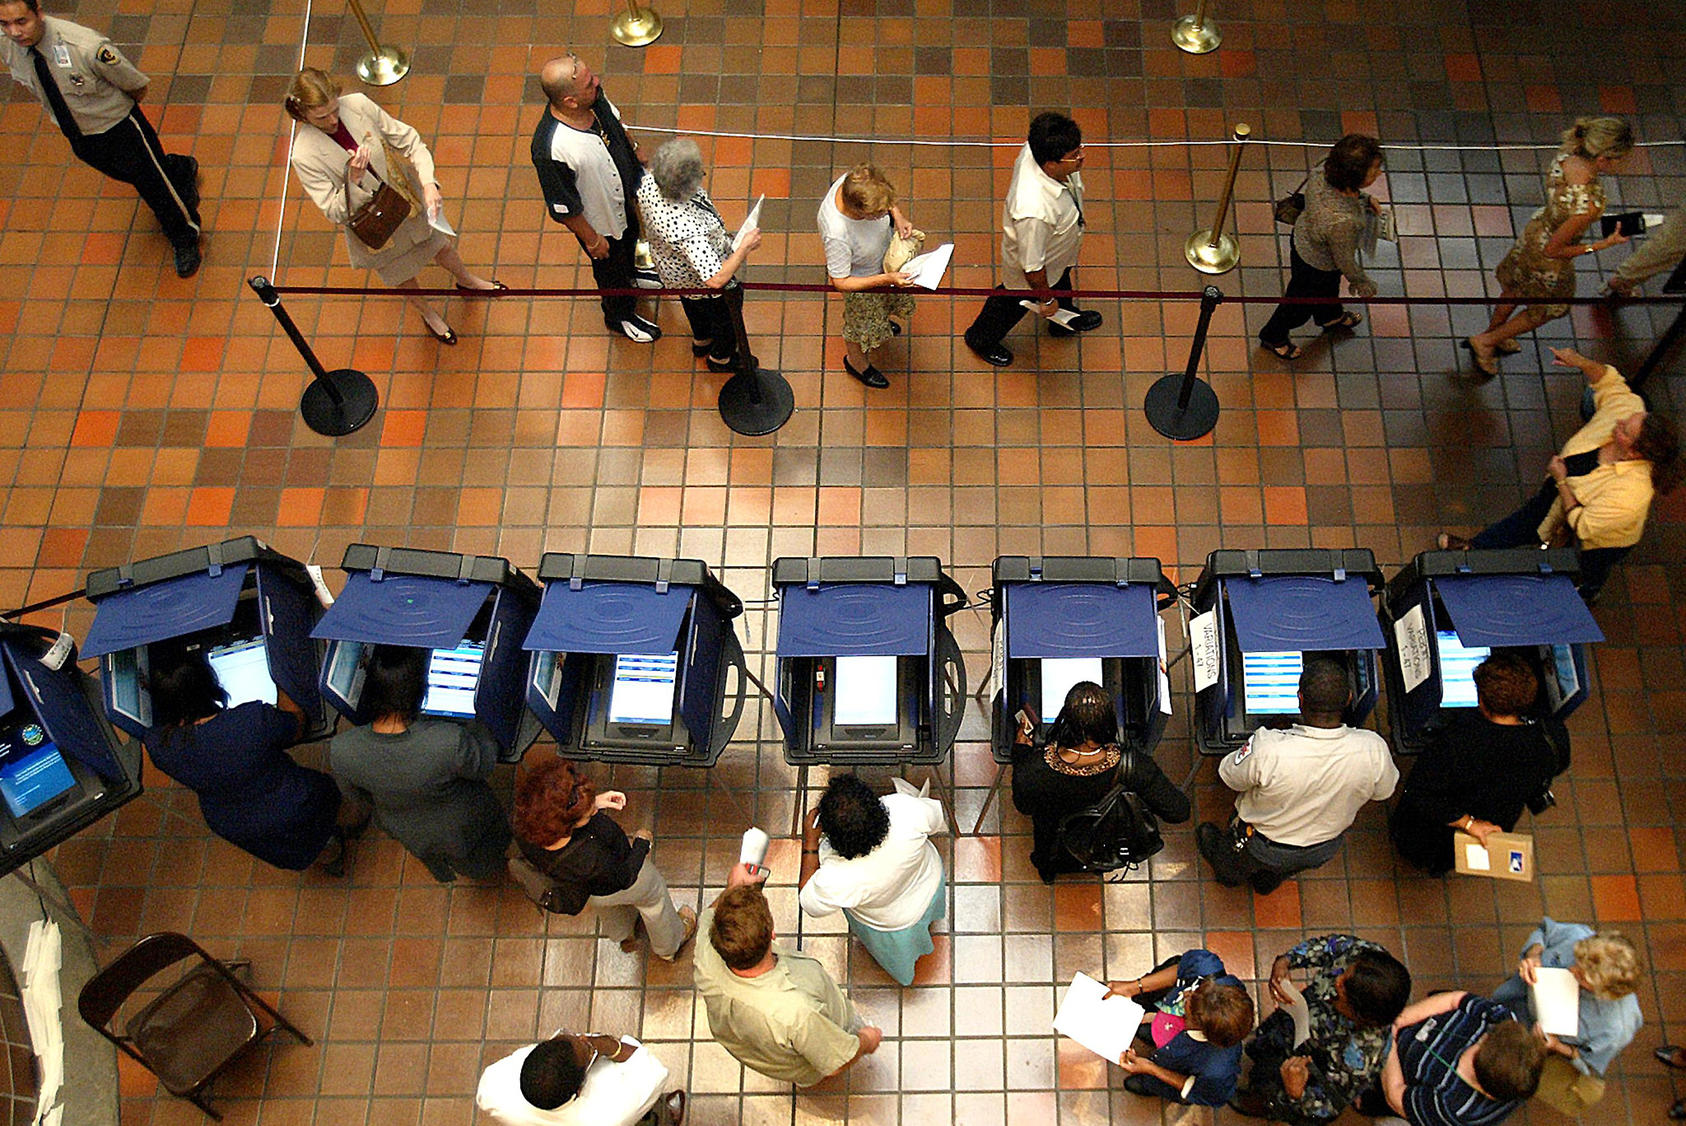 An overhead view of electronic voting machines in Miami, FL. (Vincent Laforet/The New York Times)